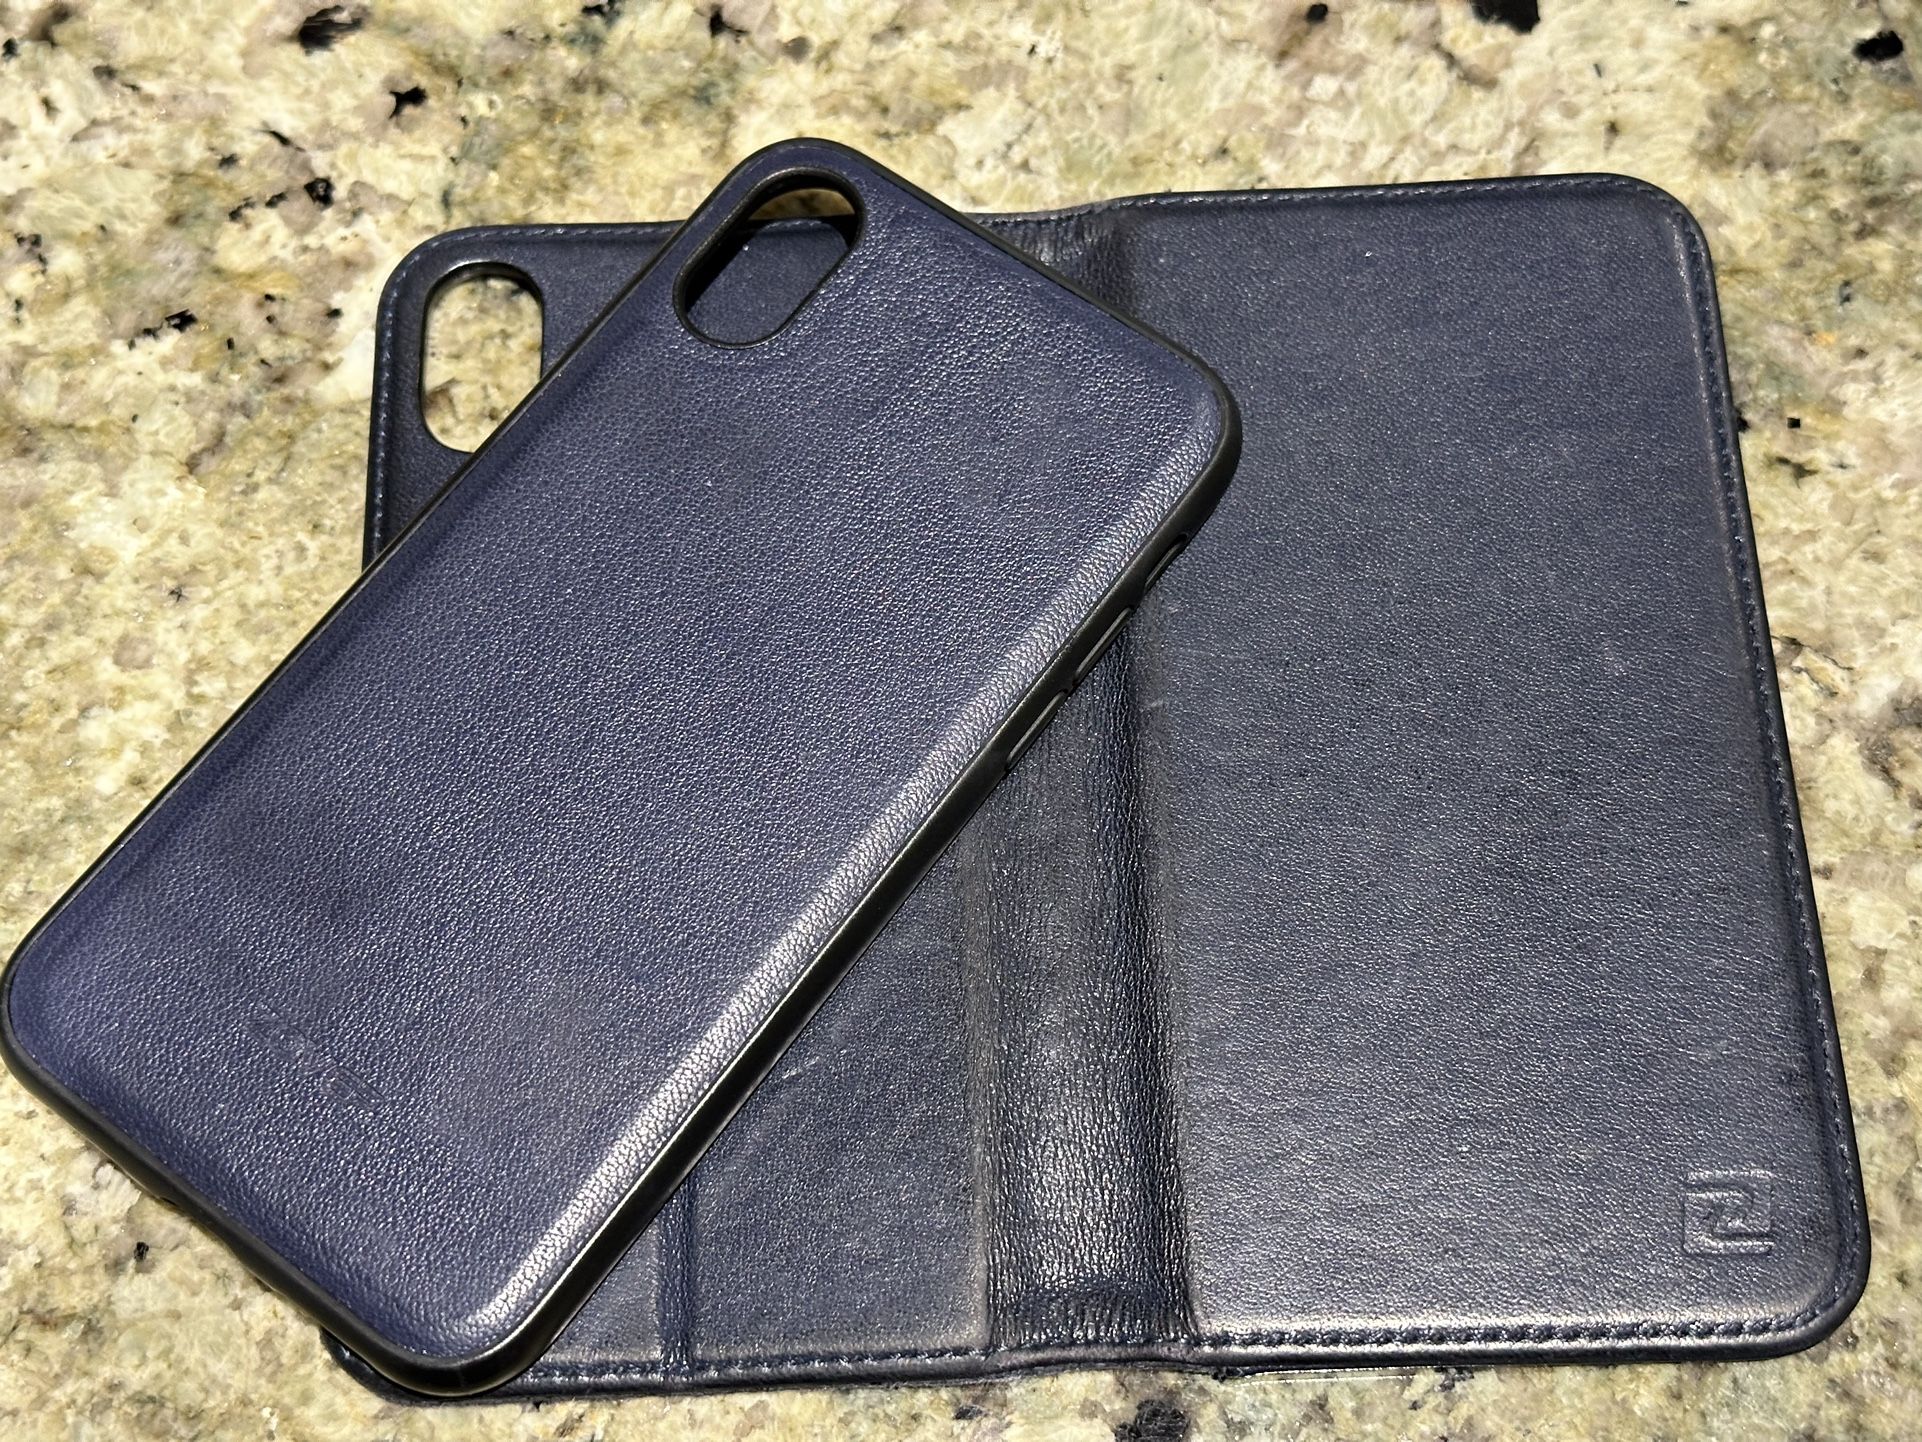 Zover Case For iPhone X